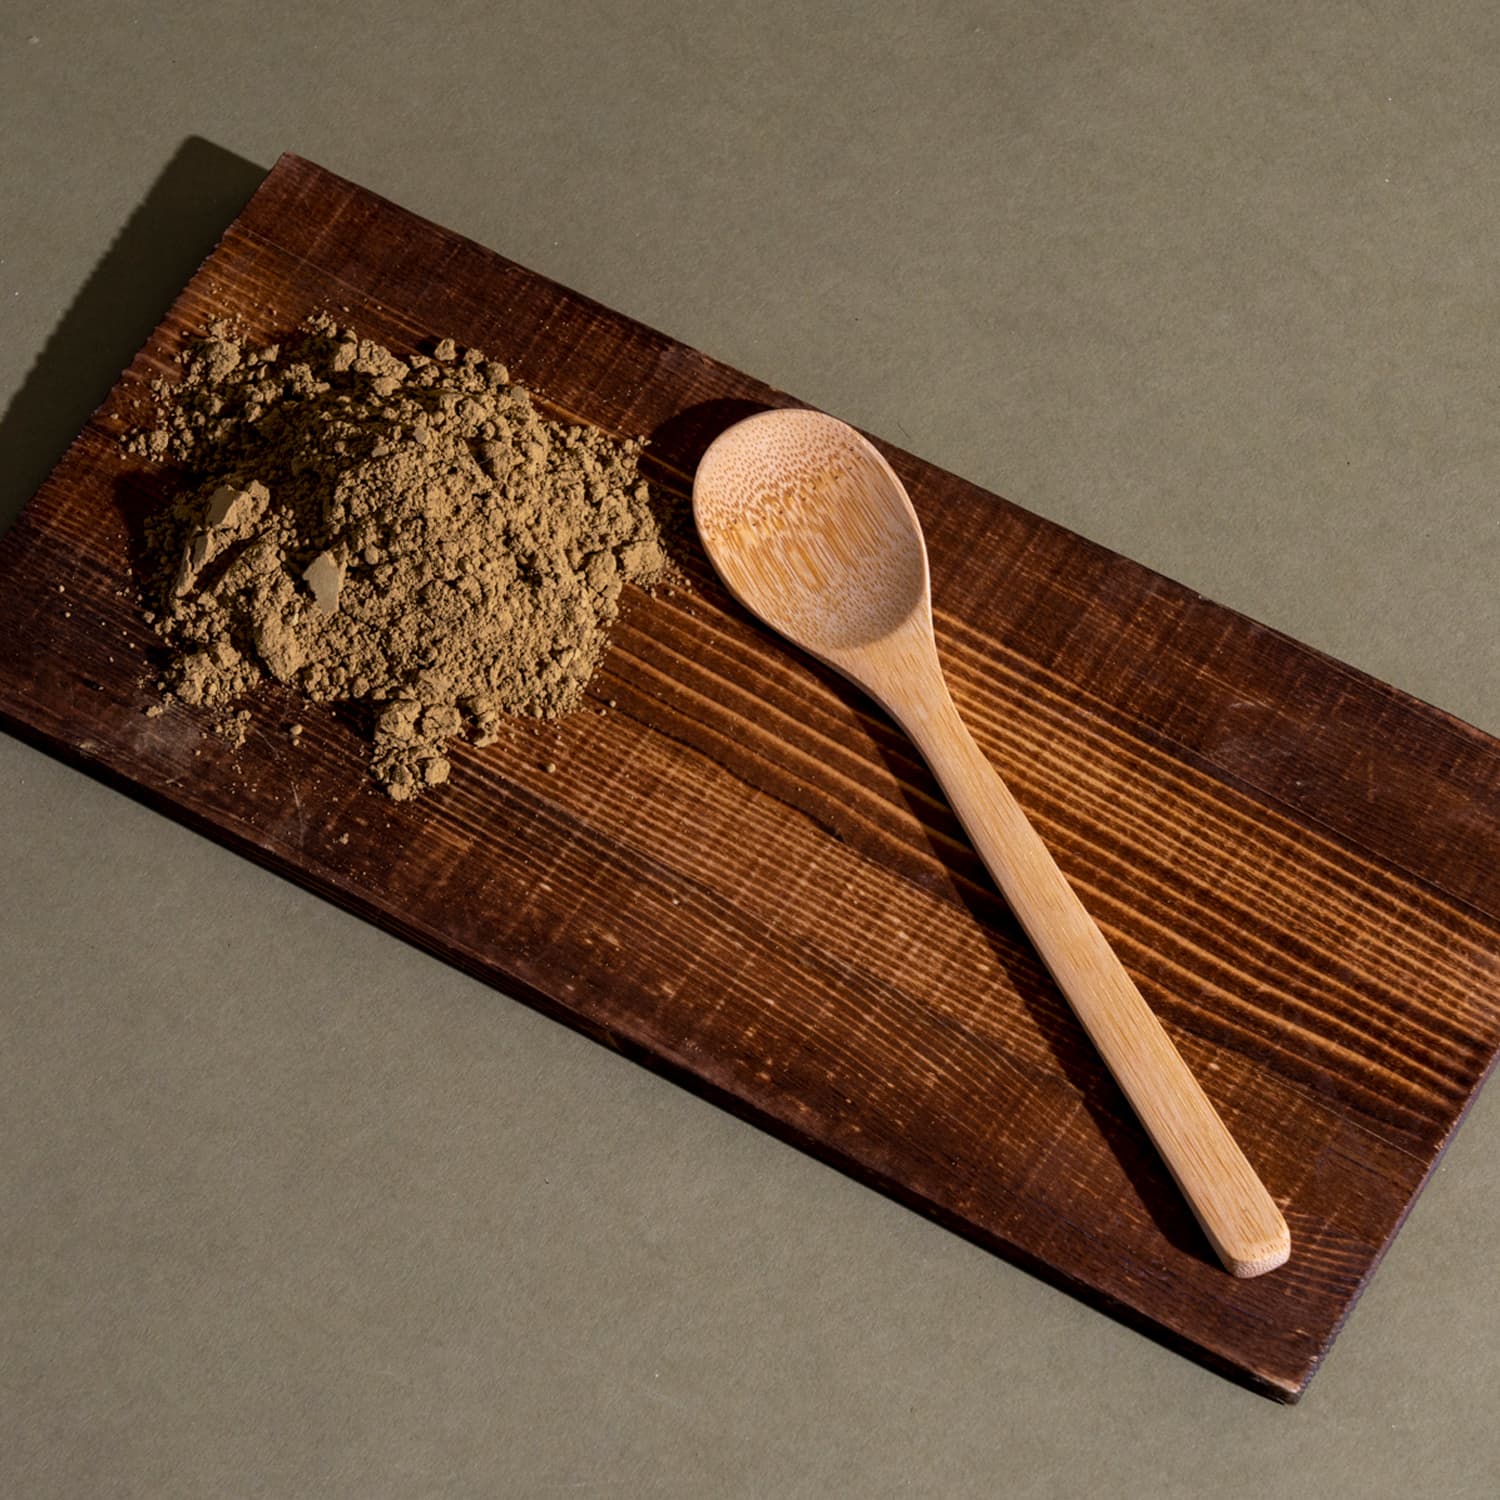 A spoon and kratom powder on a wooden cutting board